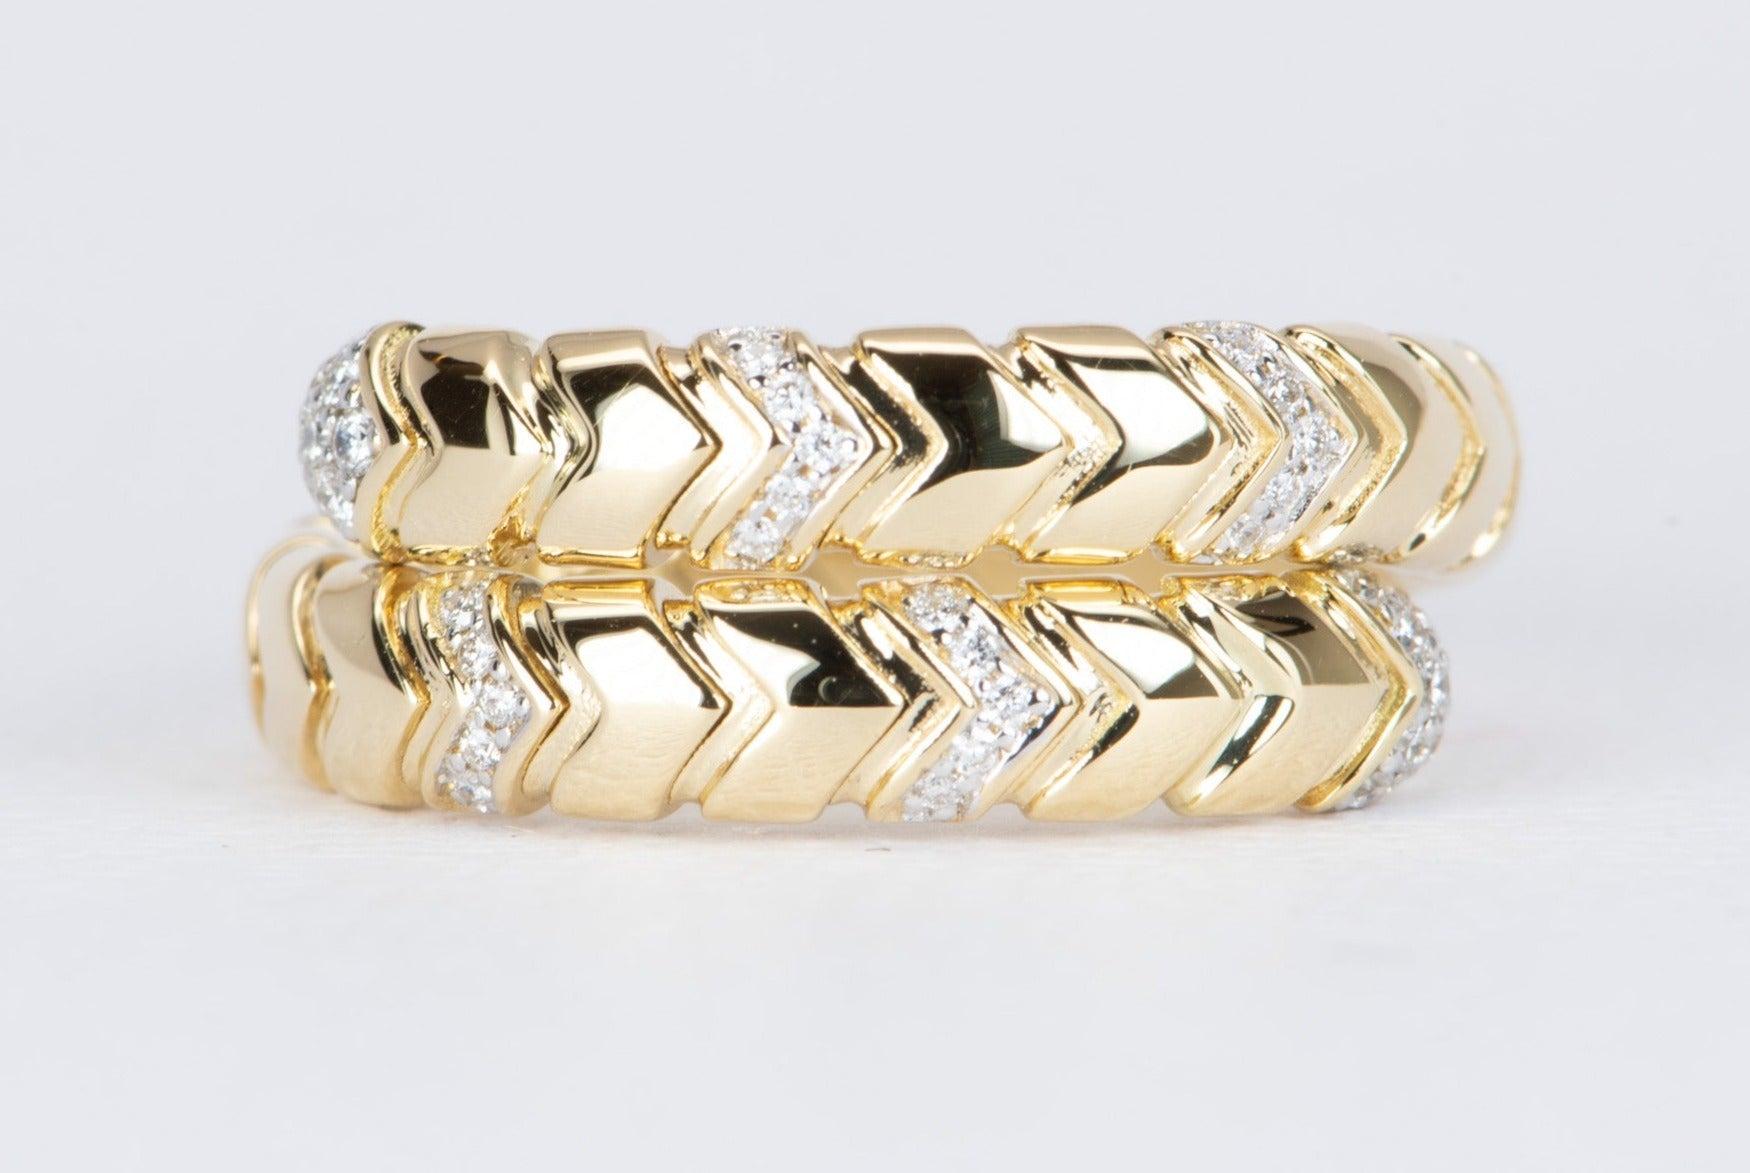 ♥ Dual Color 18K Gold Tubogas Stretch Bypass Ring with Diamonds

♥ Size 7 in stock, stretchable to size 8
♥ Other sizes are available as made-to-order items. Contact us for details.

♥ Ring width: 4mm (8mm wide where the bands overlap)
♥ Ring